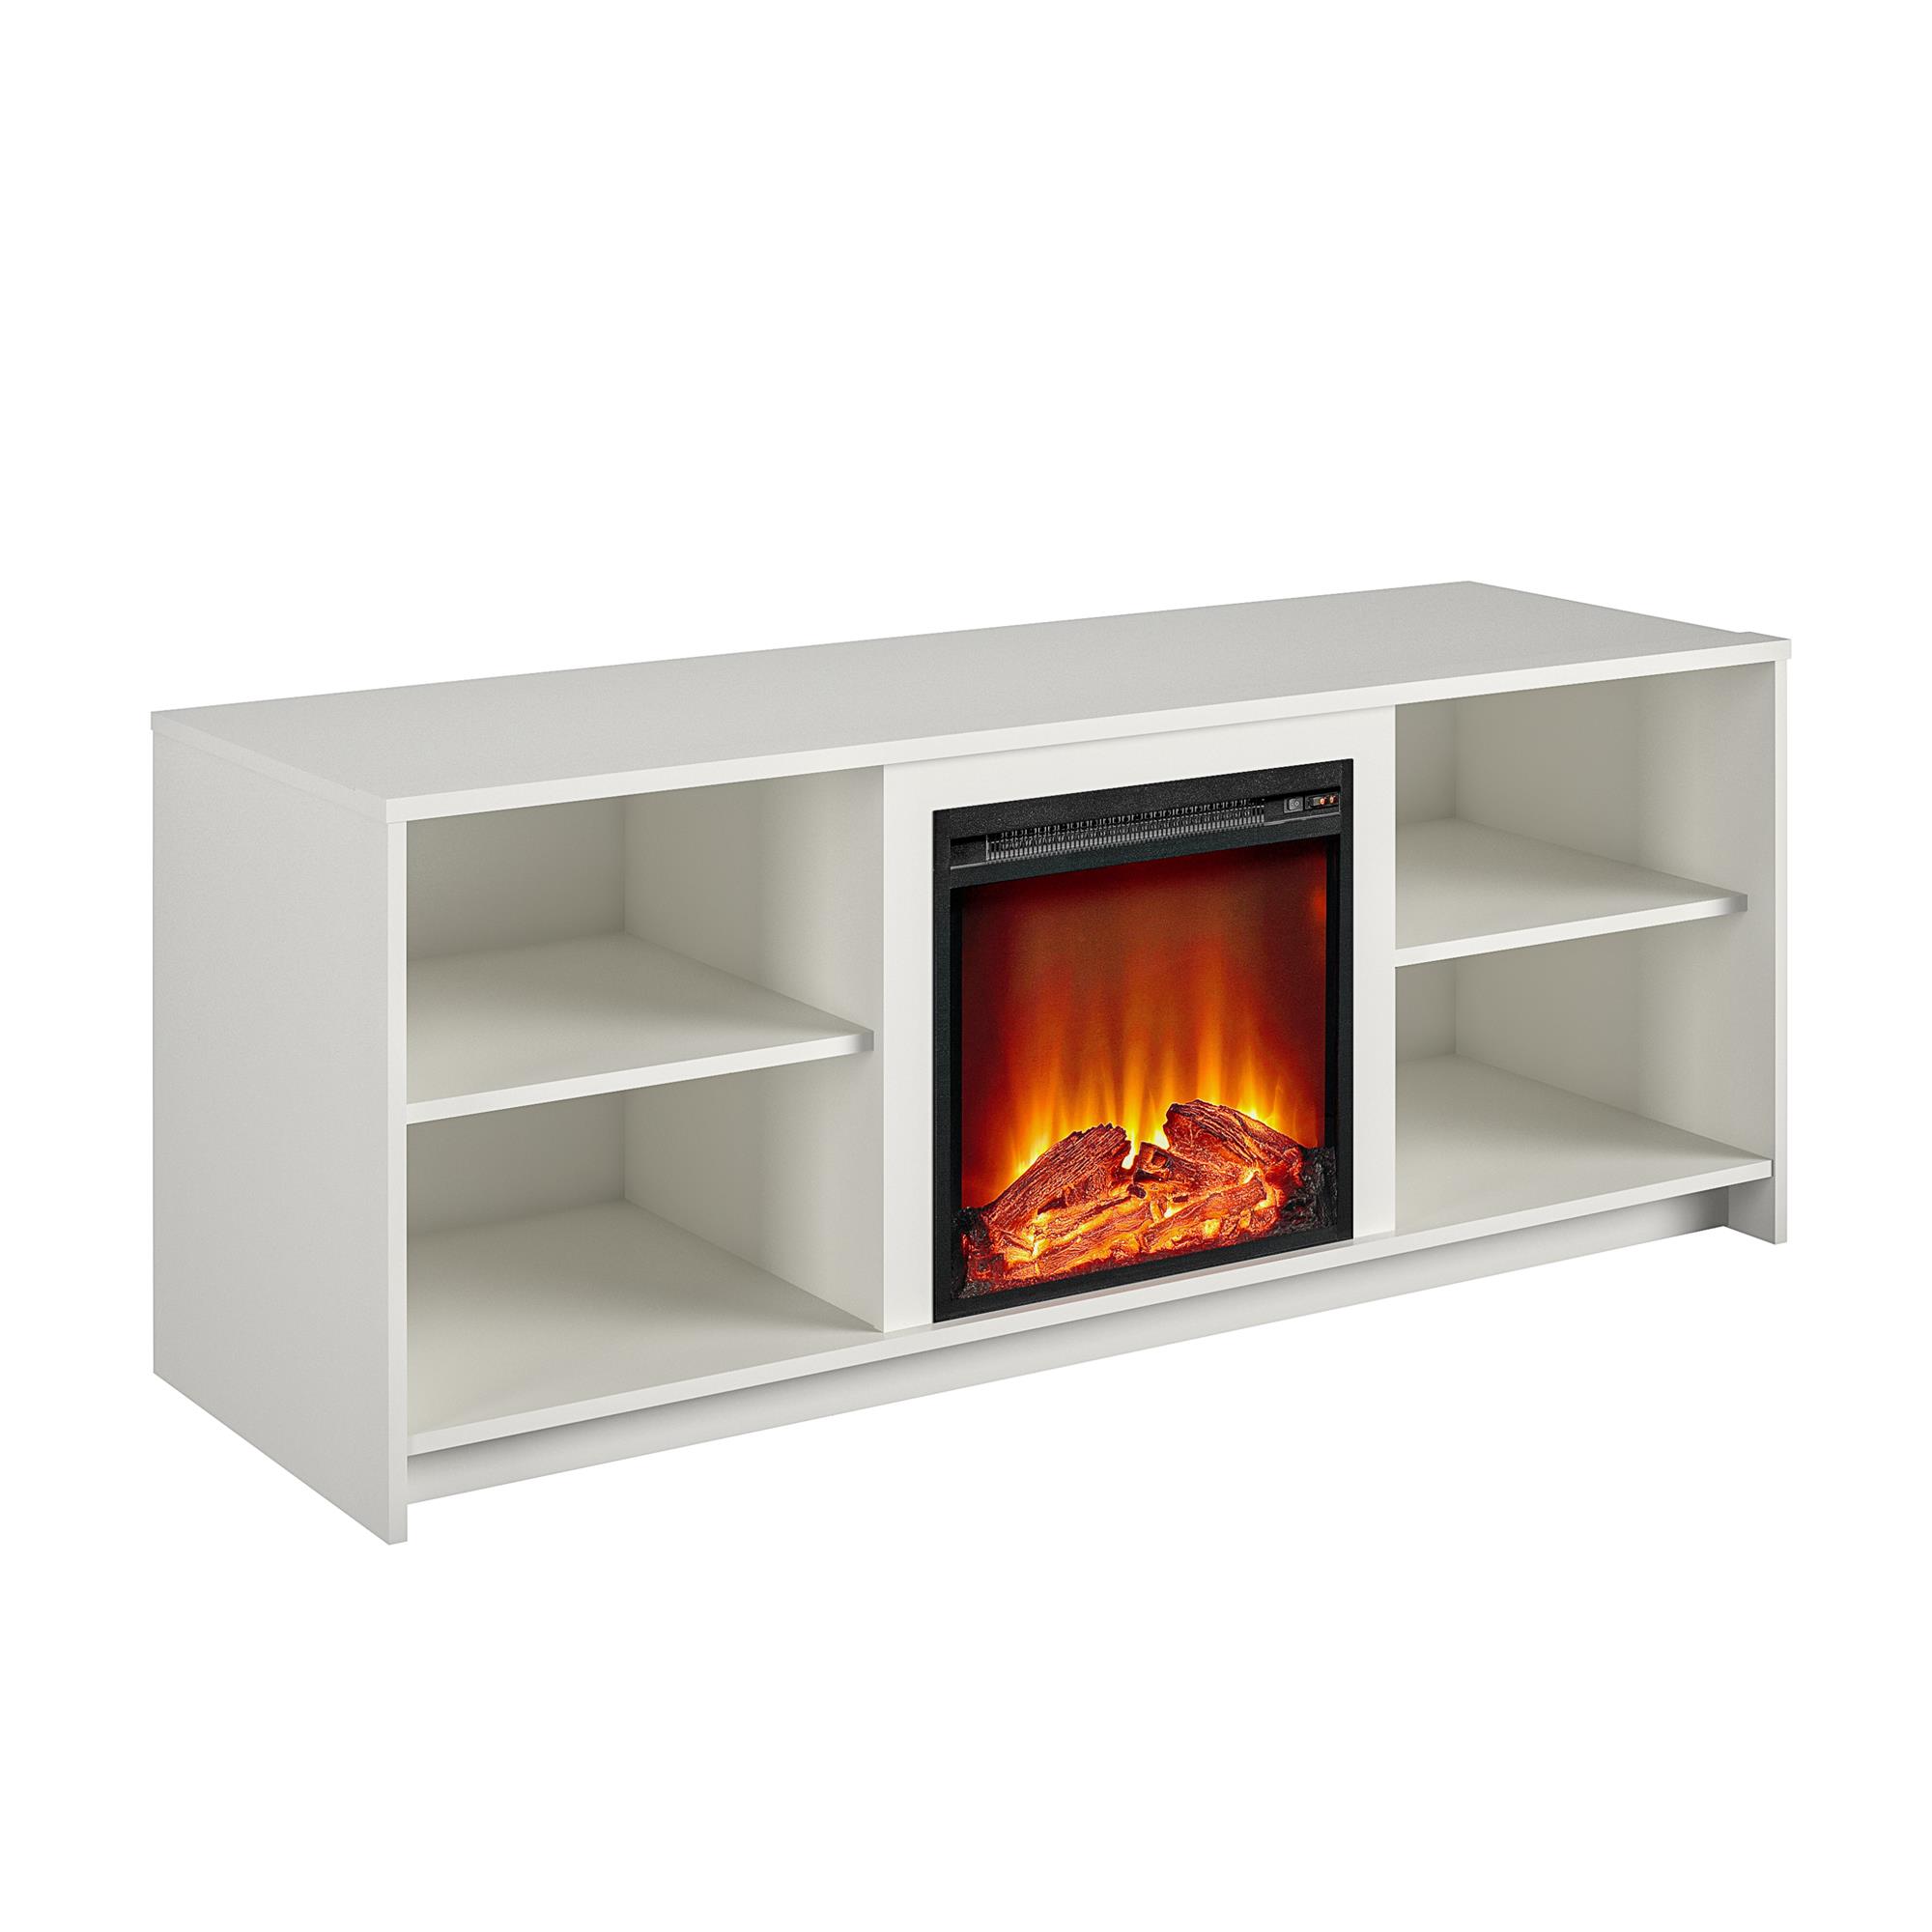 Mainstays Fireplace TV Stand for TVs up to 65", White - image 4 of 11